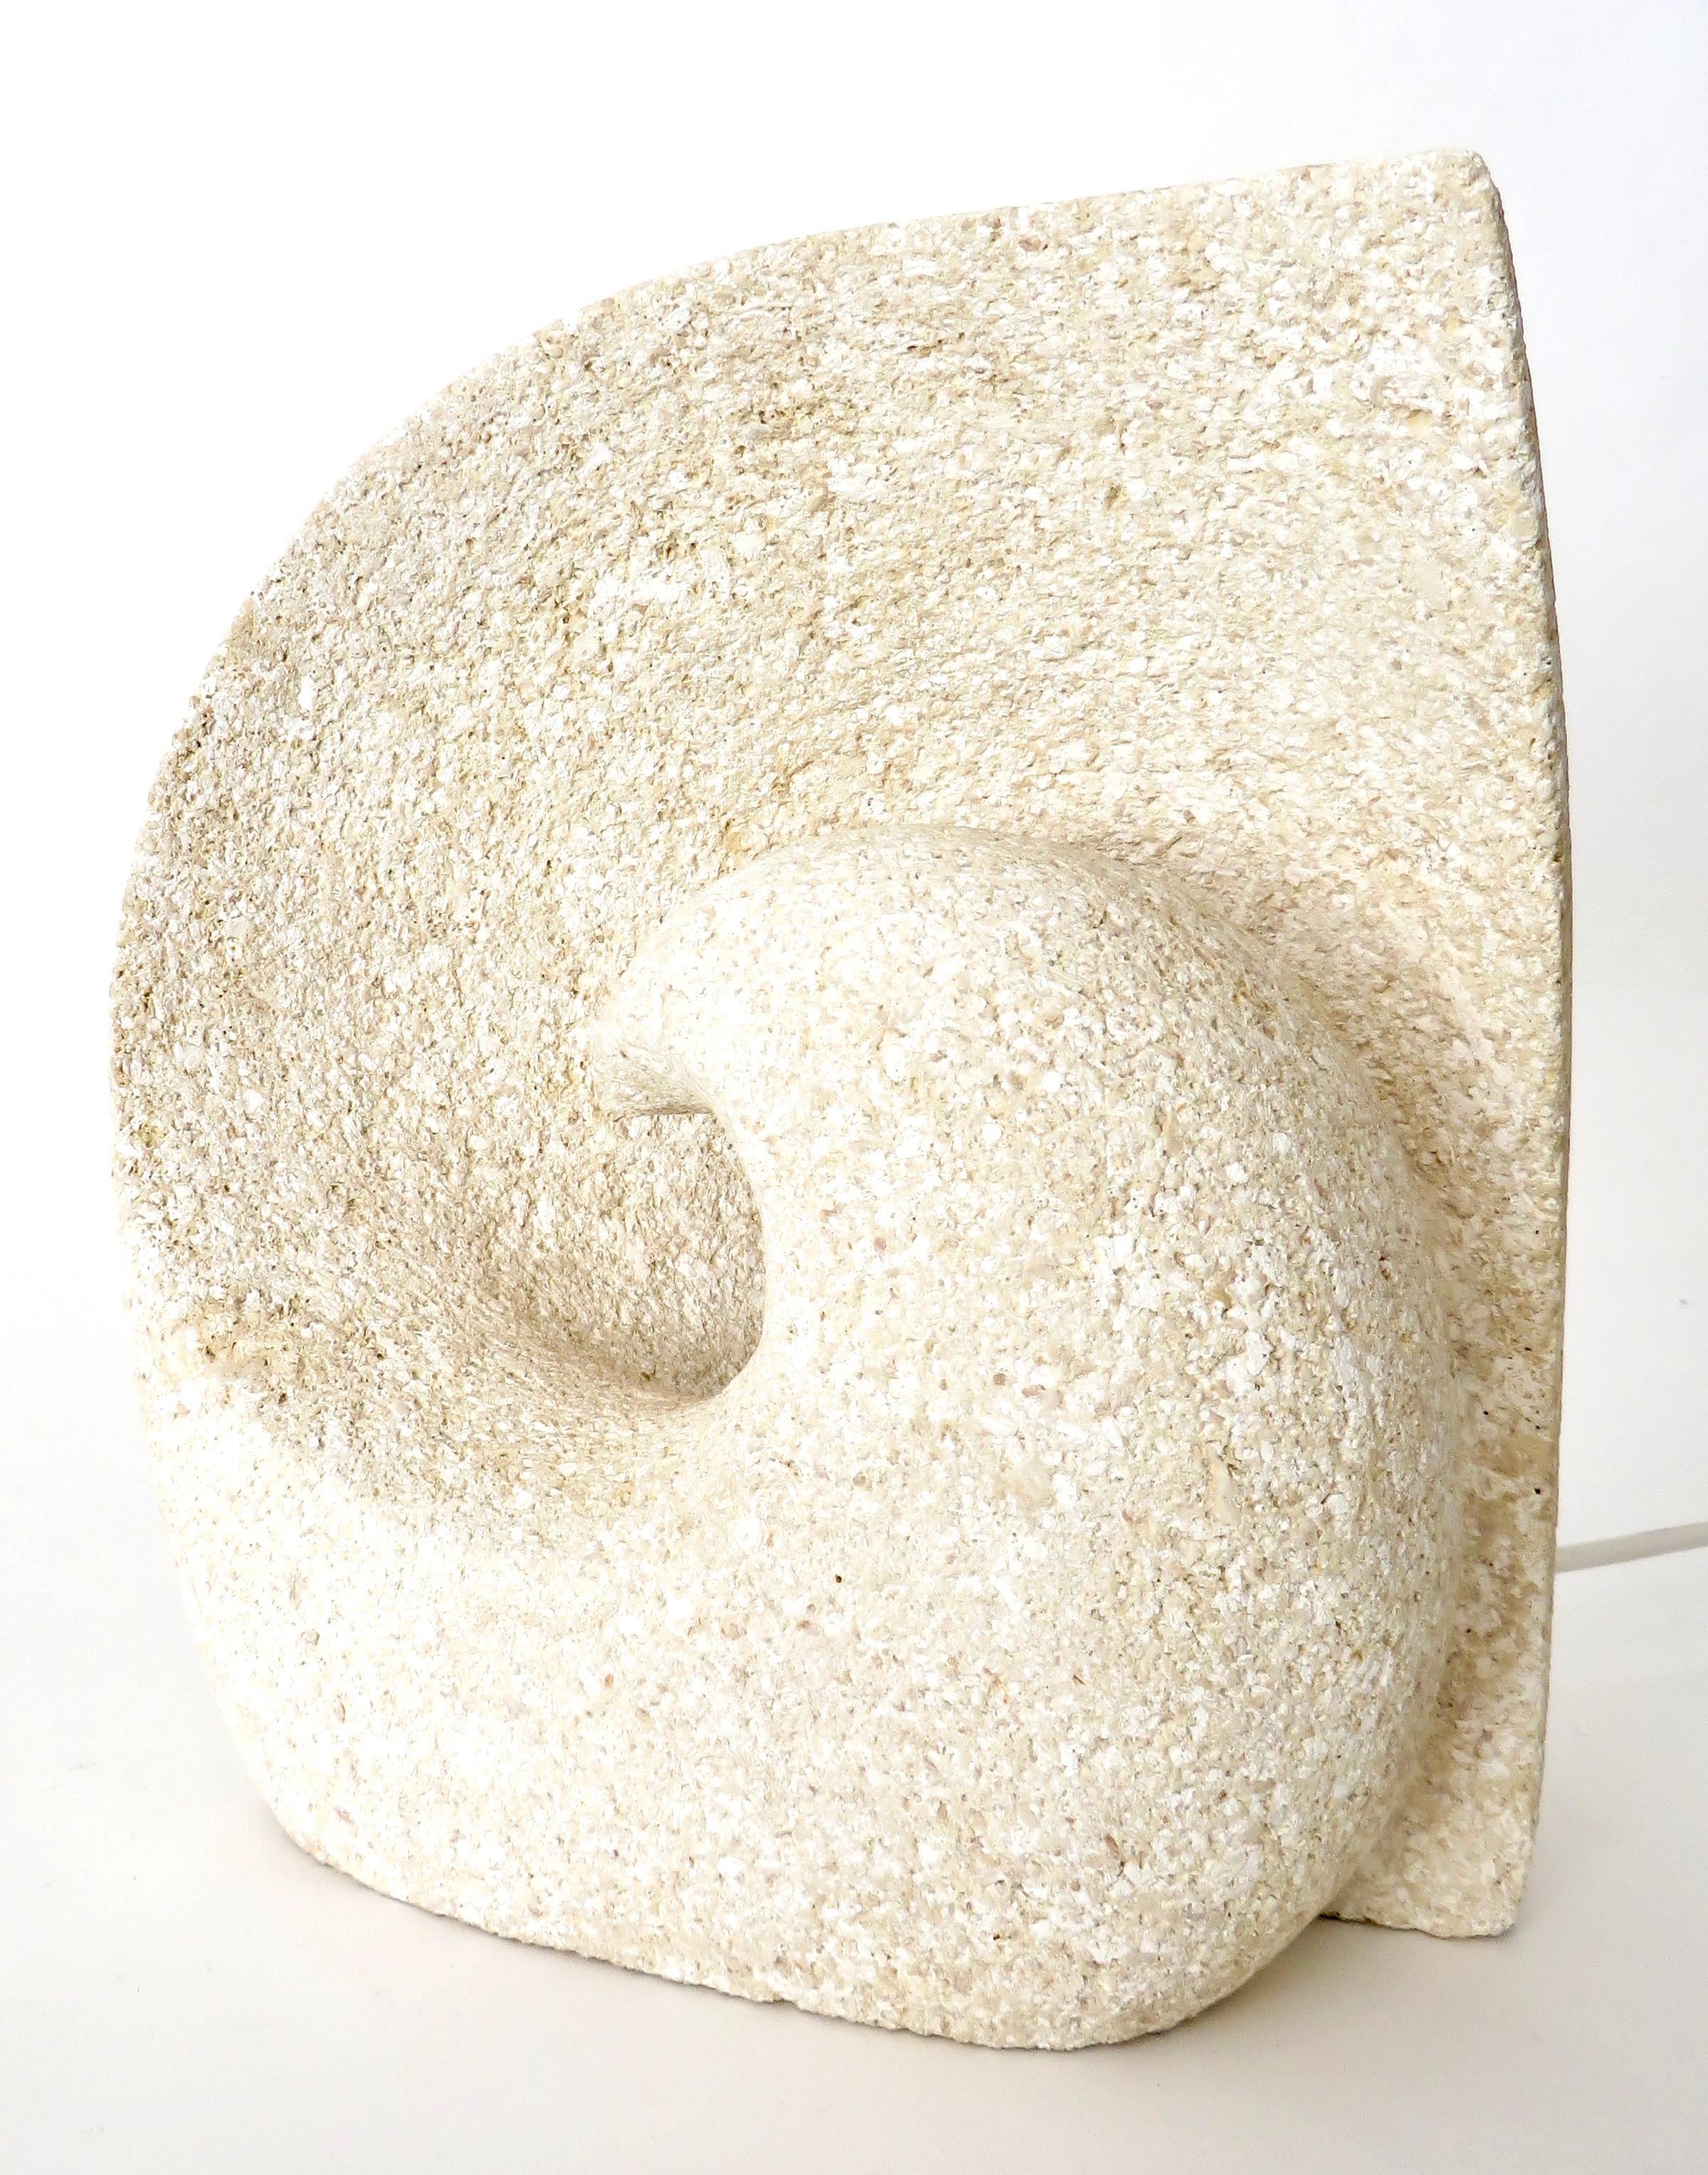 Hand carved French volcanic Luberon limestone or tuff stone lamp with a Minimalist beton-brut architectural bearing.
An unique abstract seashell wave form.
By Vallauris artist Albert Tormos, made circa 1970s.
Tormos also worked in St Tropez